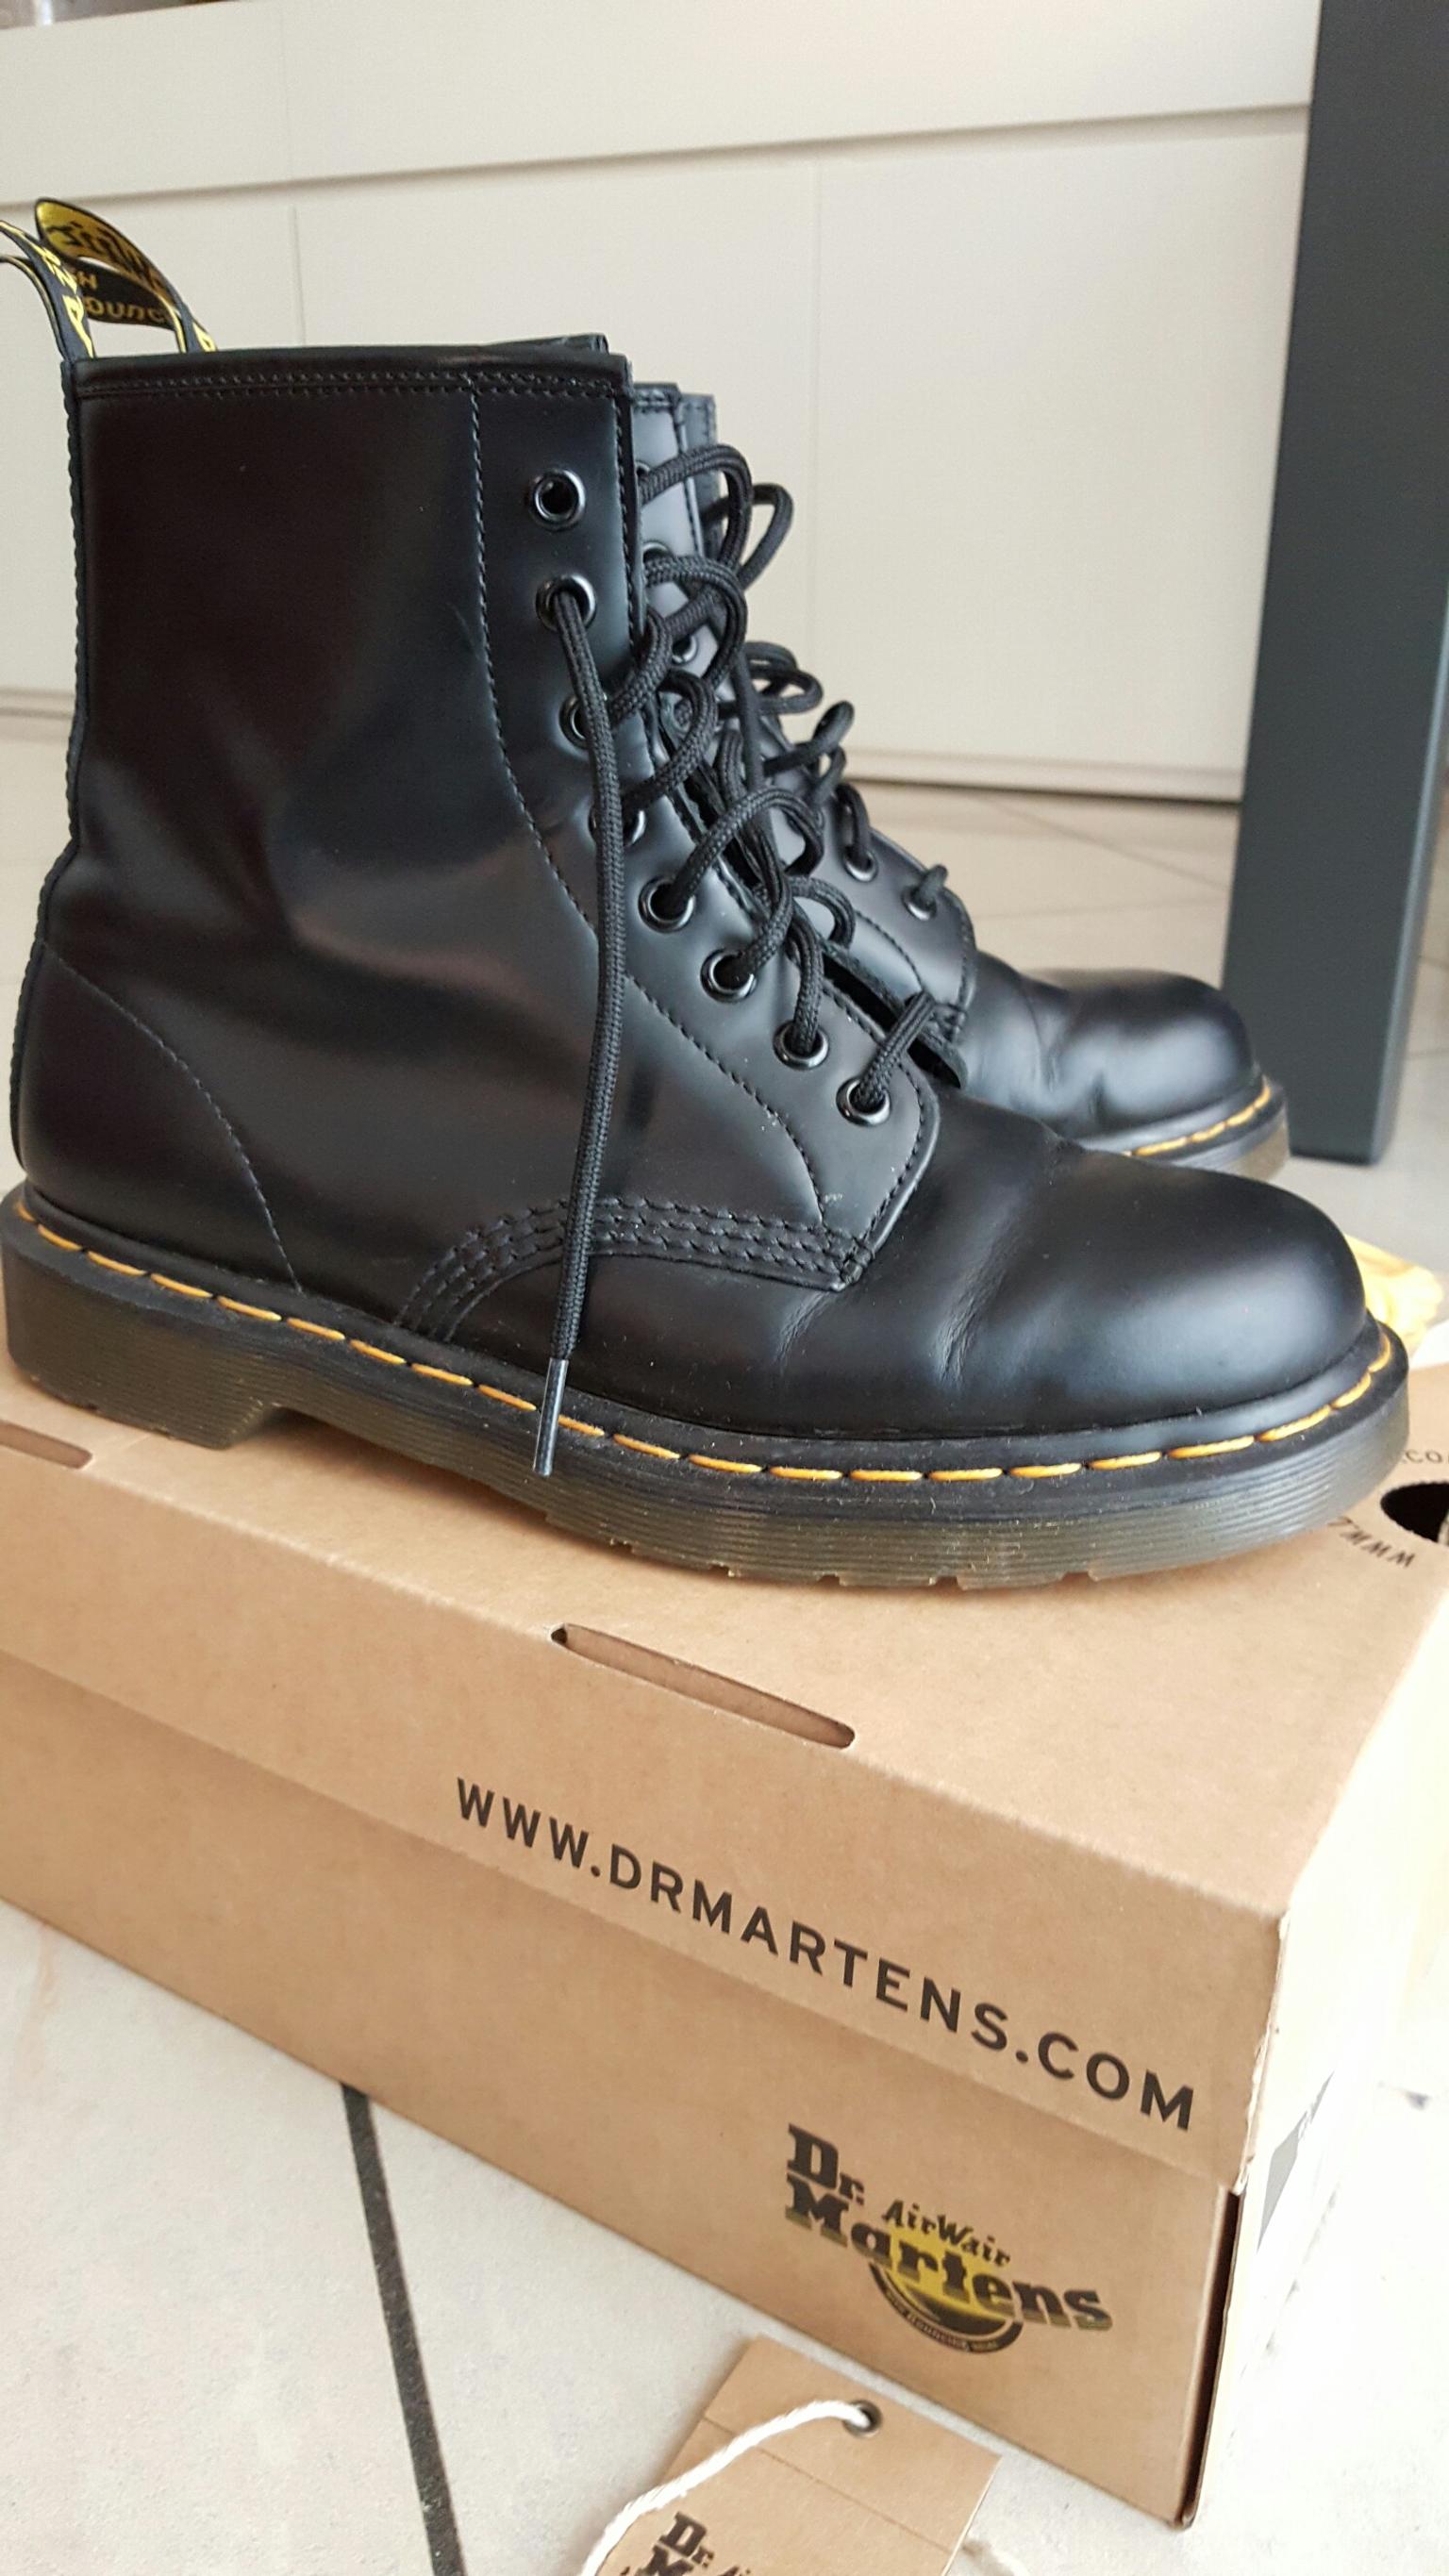 Anfibi Dr. Martens n.39 in 20093 Cologno Monzese for €50.00 for sale |  Shpock